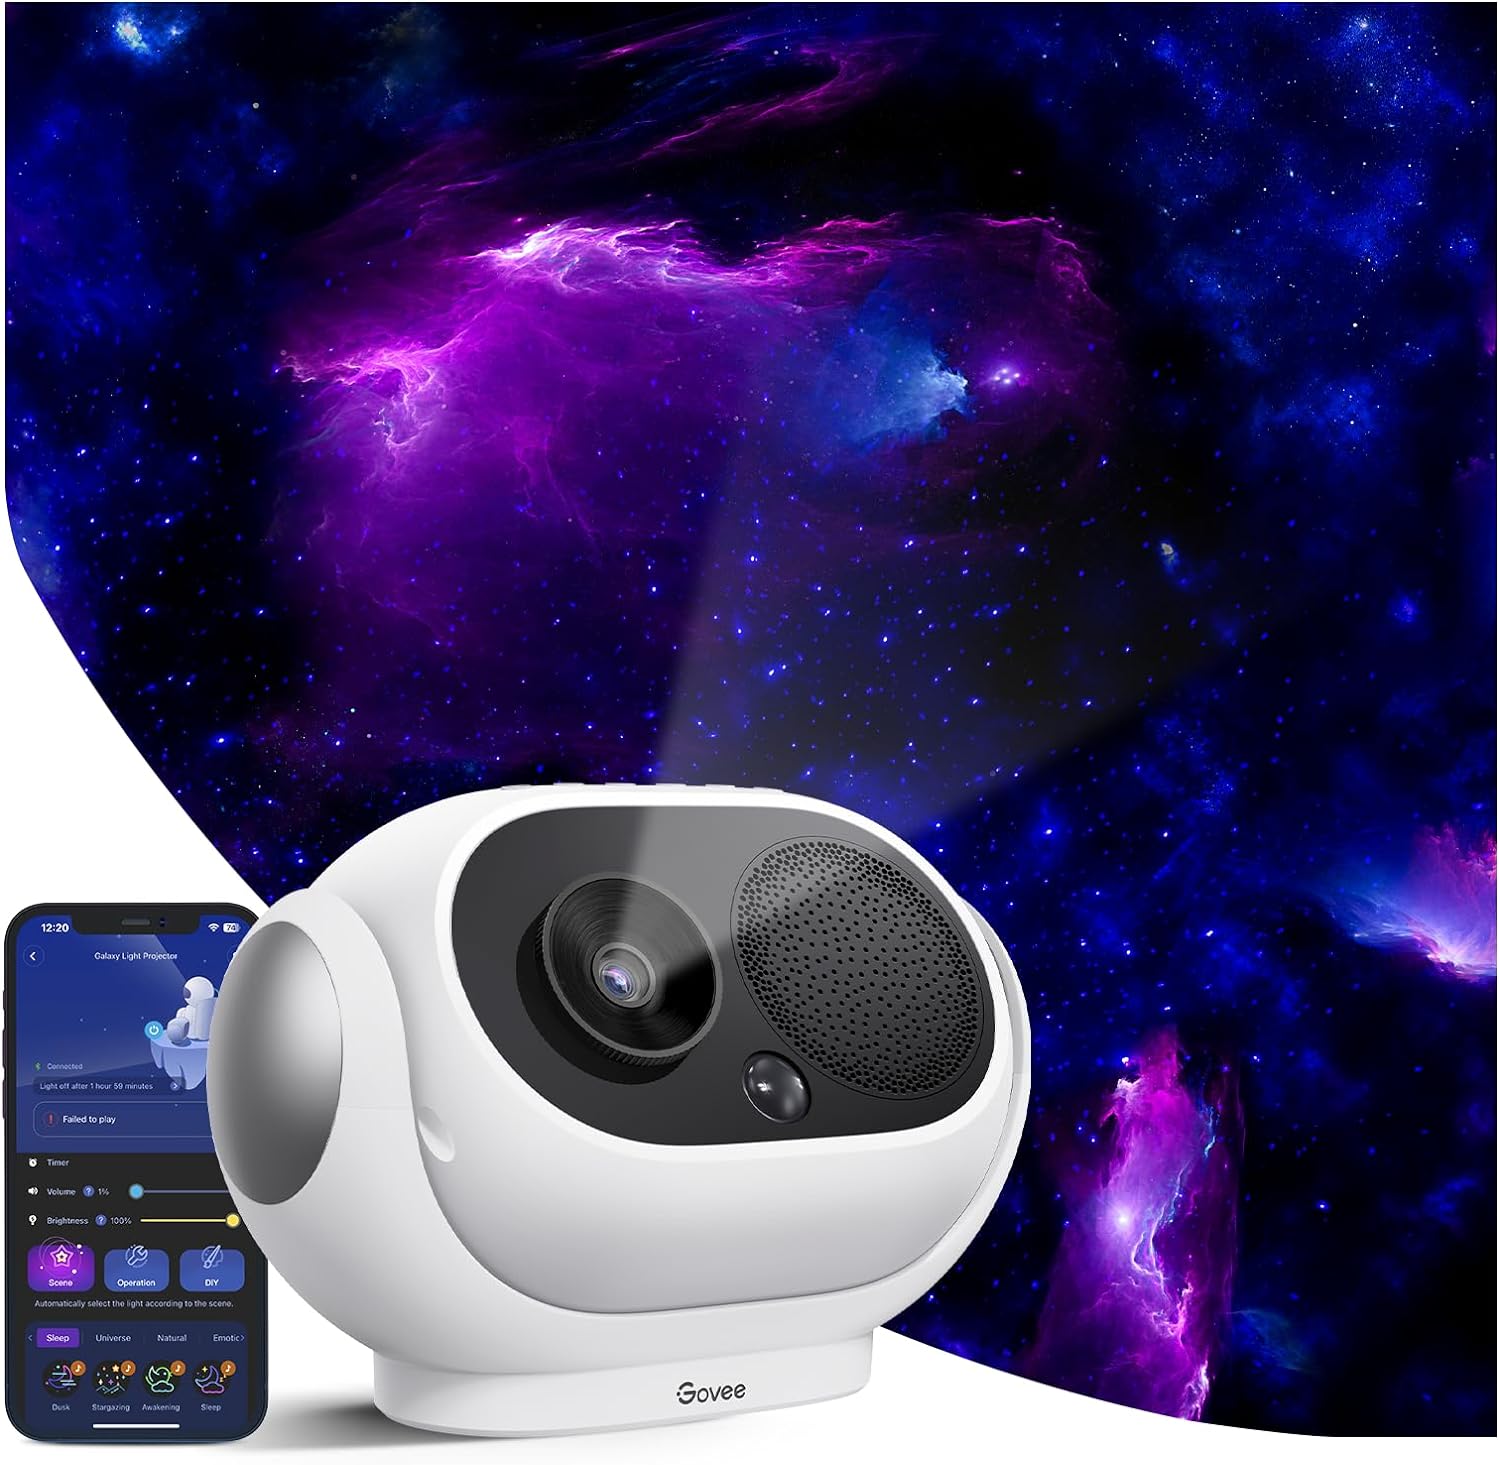 Govee Star Projector with Bluetooth Speaker - 8 Discs, 38 Modes, 21 White Noises for Bedroom Relaxation